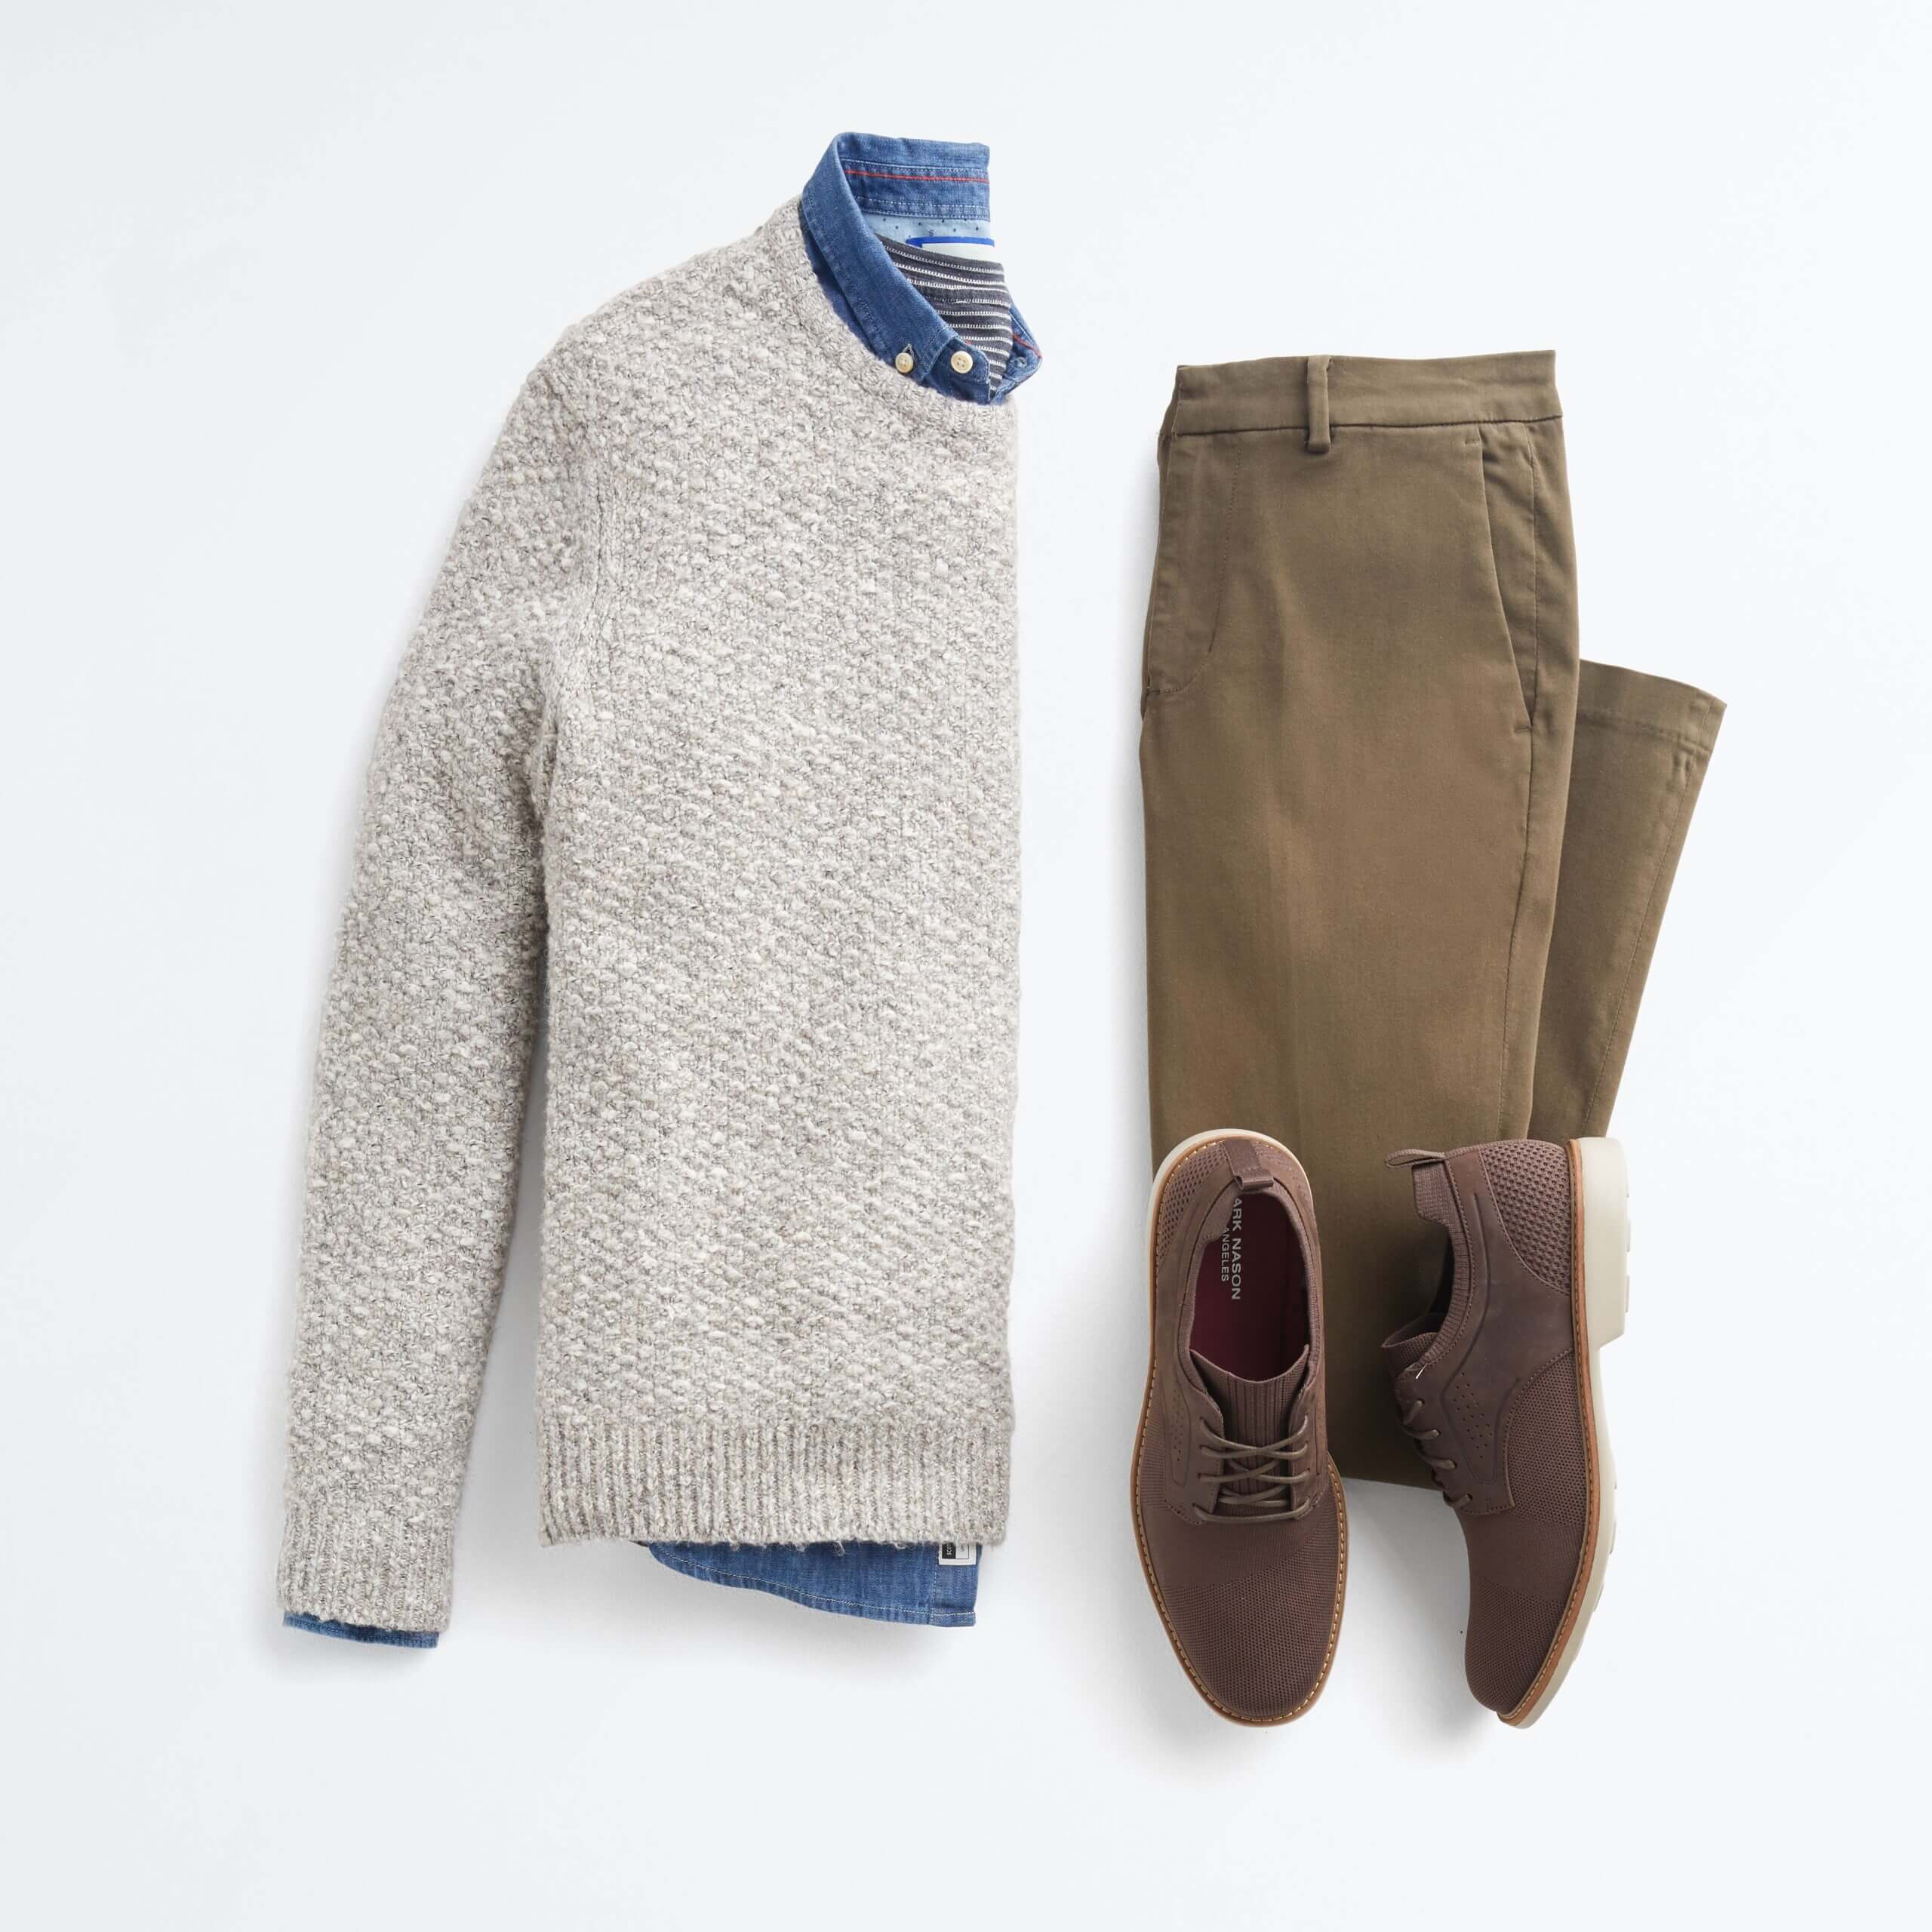 Rarely Twinkle scrub What colors pair with brown shoes? | Stitch Fix Men